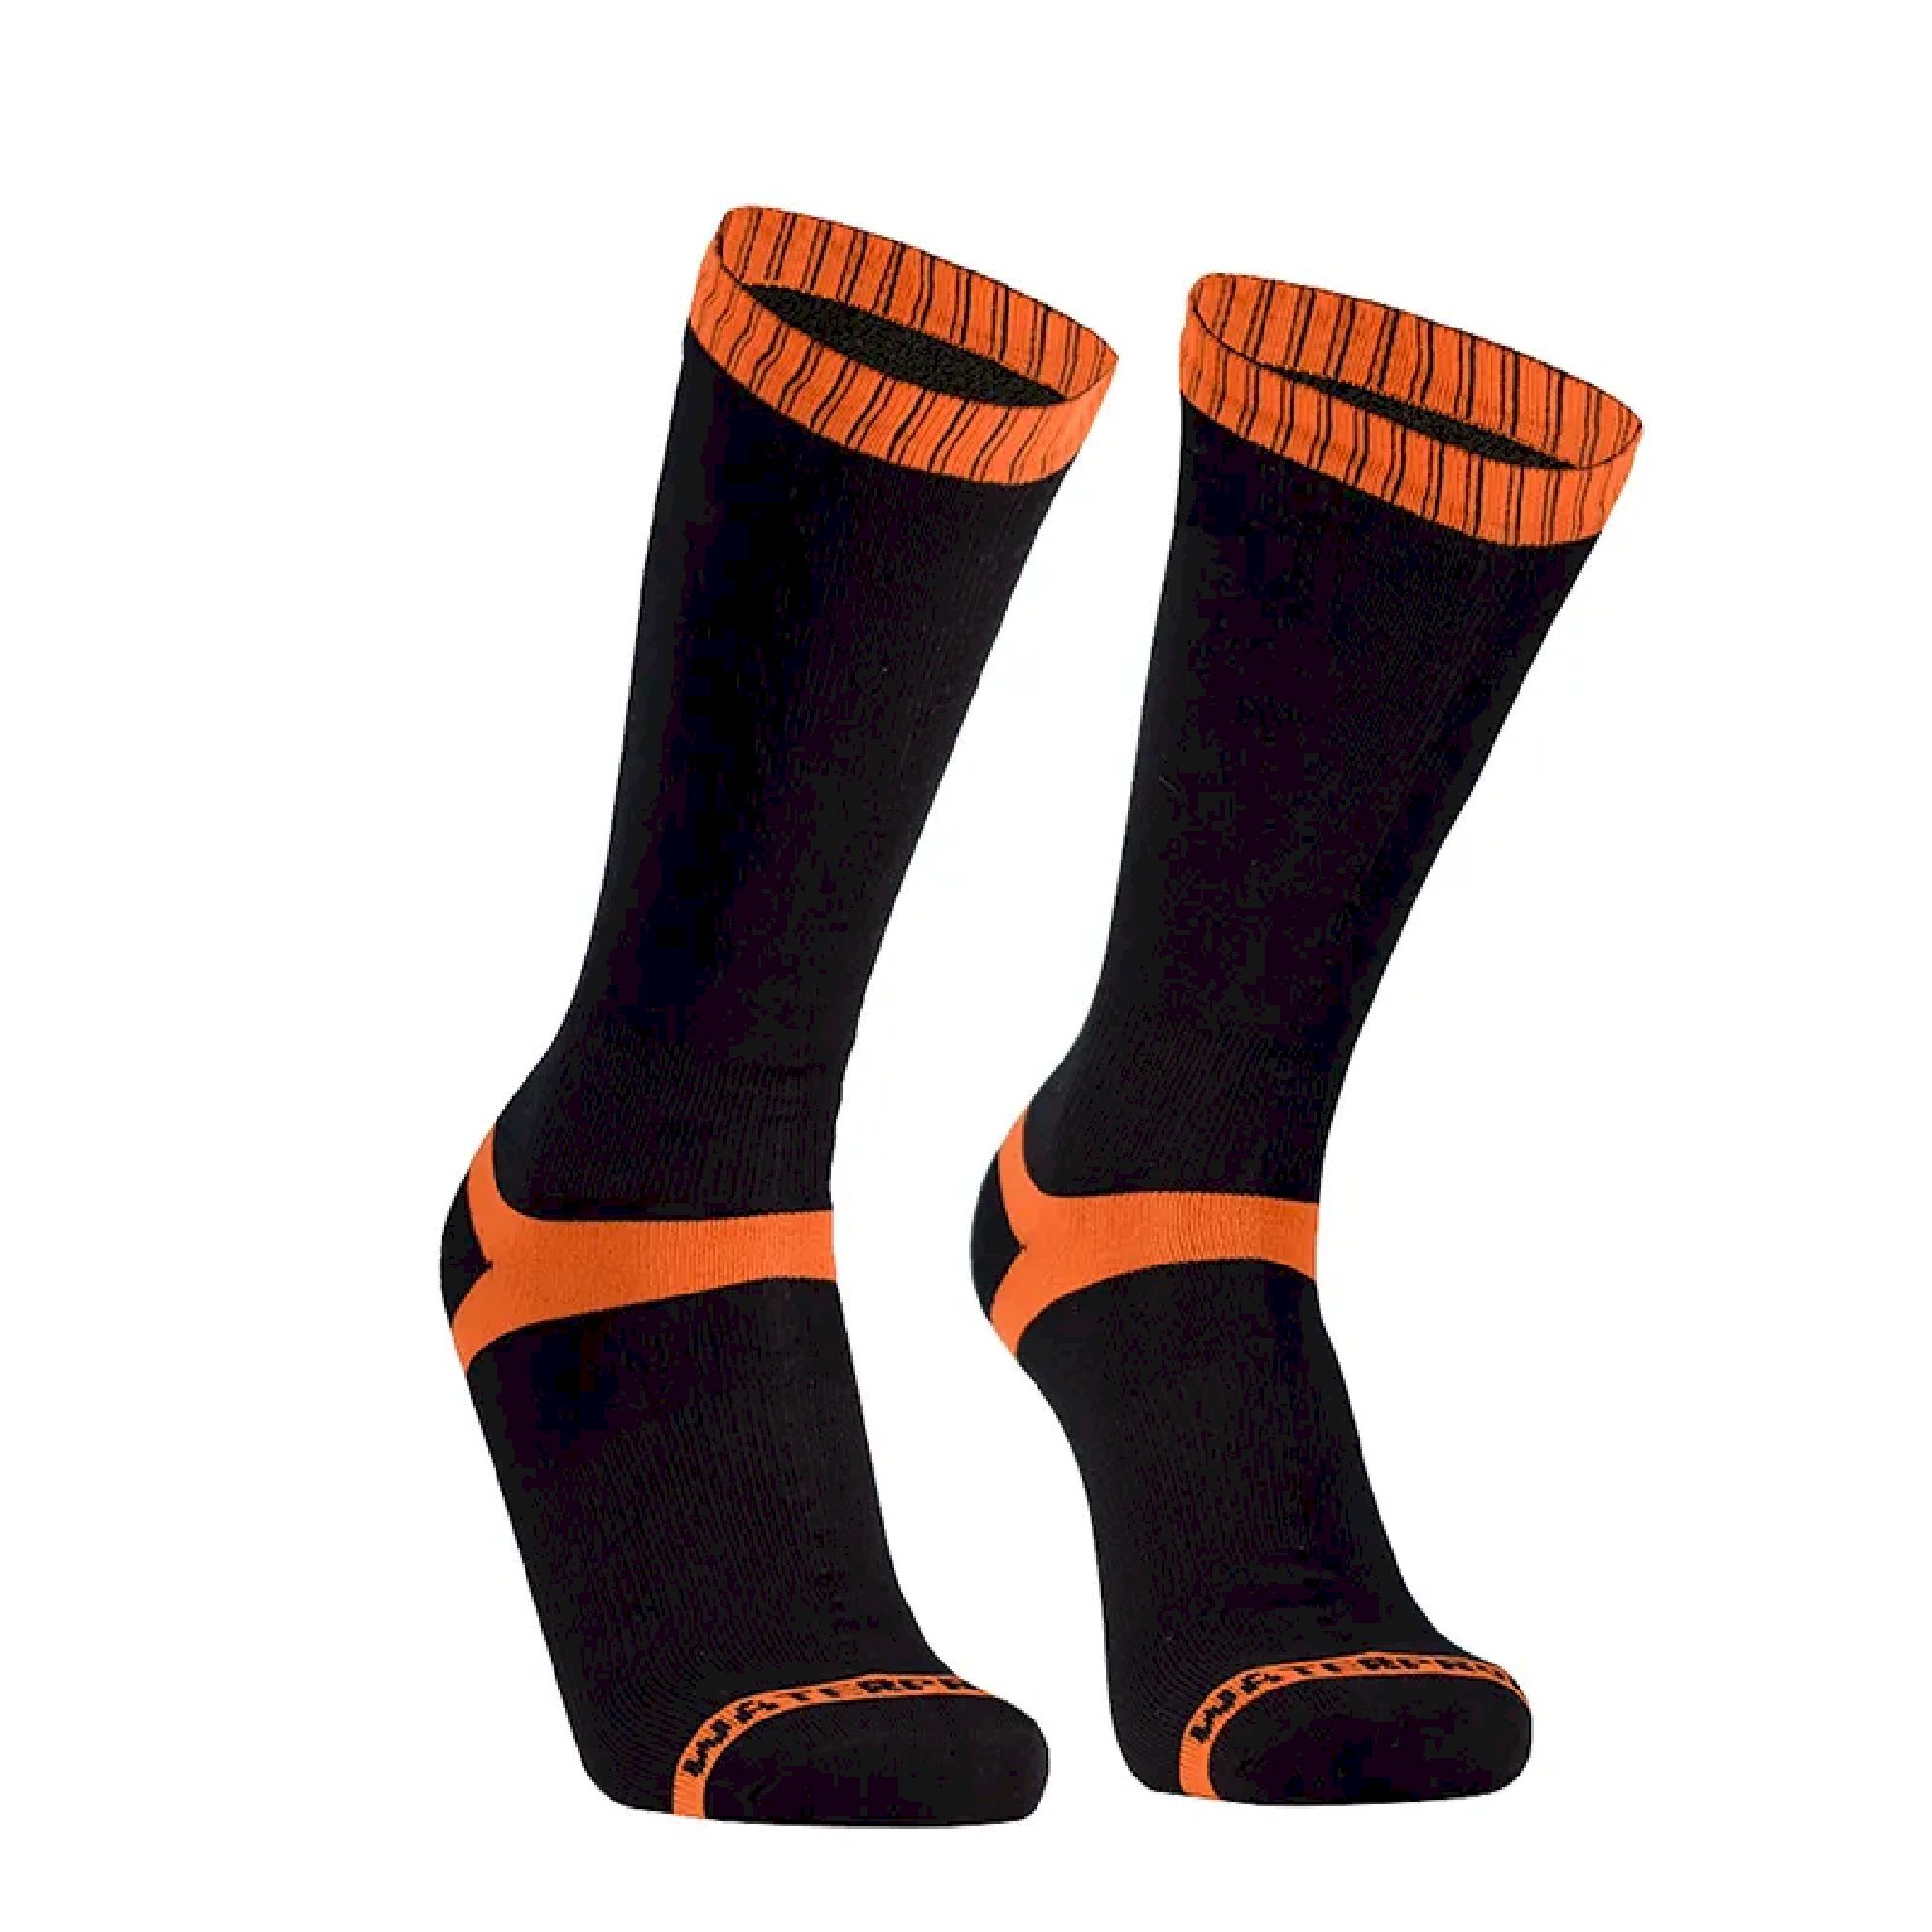 DexShell Hytherm Pro Socks - Calcetines impermeables | Hardloop